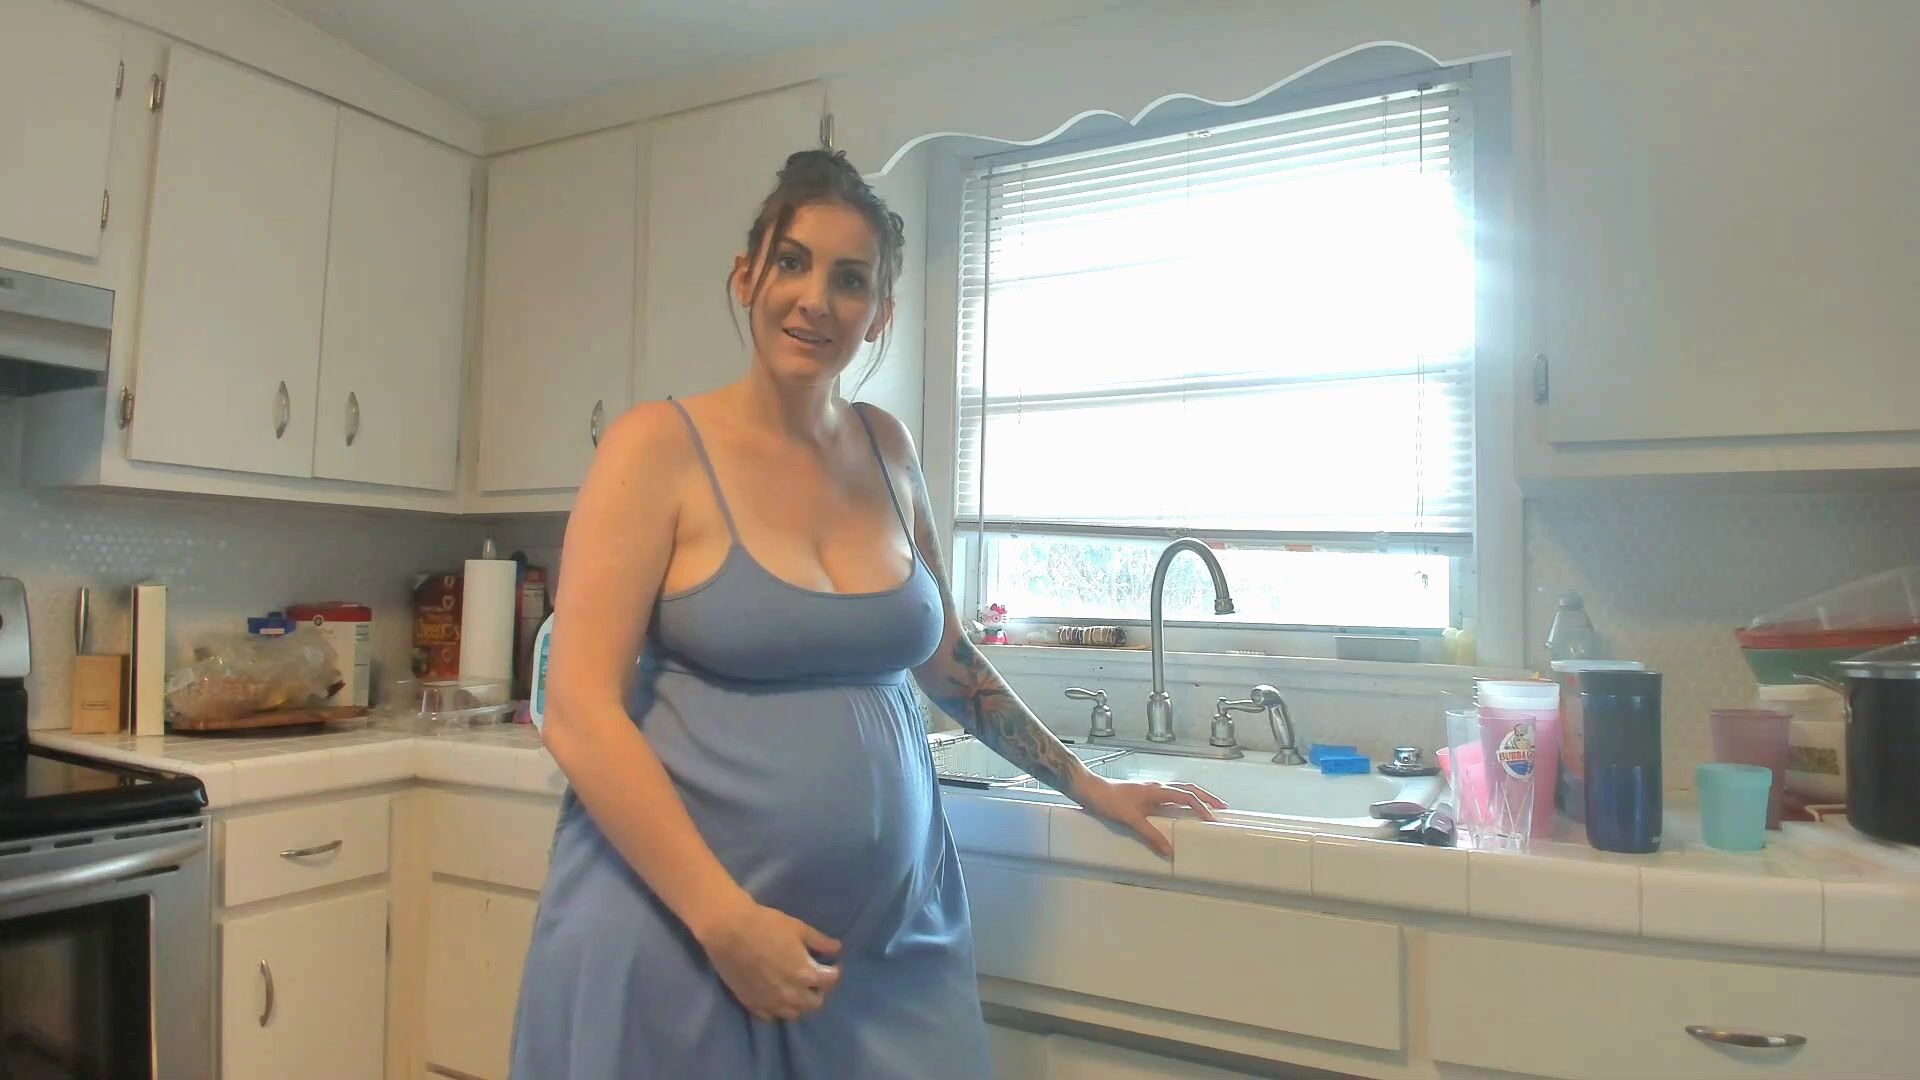 Kelly Payne pregnant and submissive mom